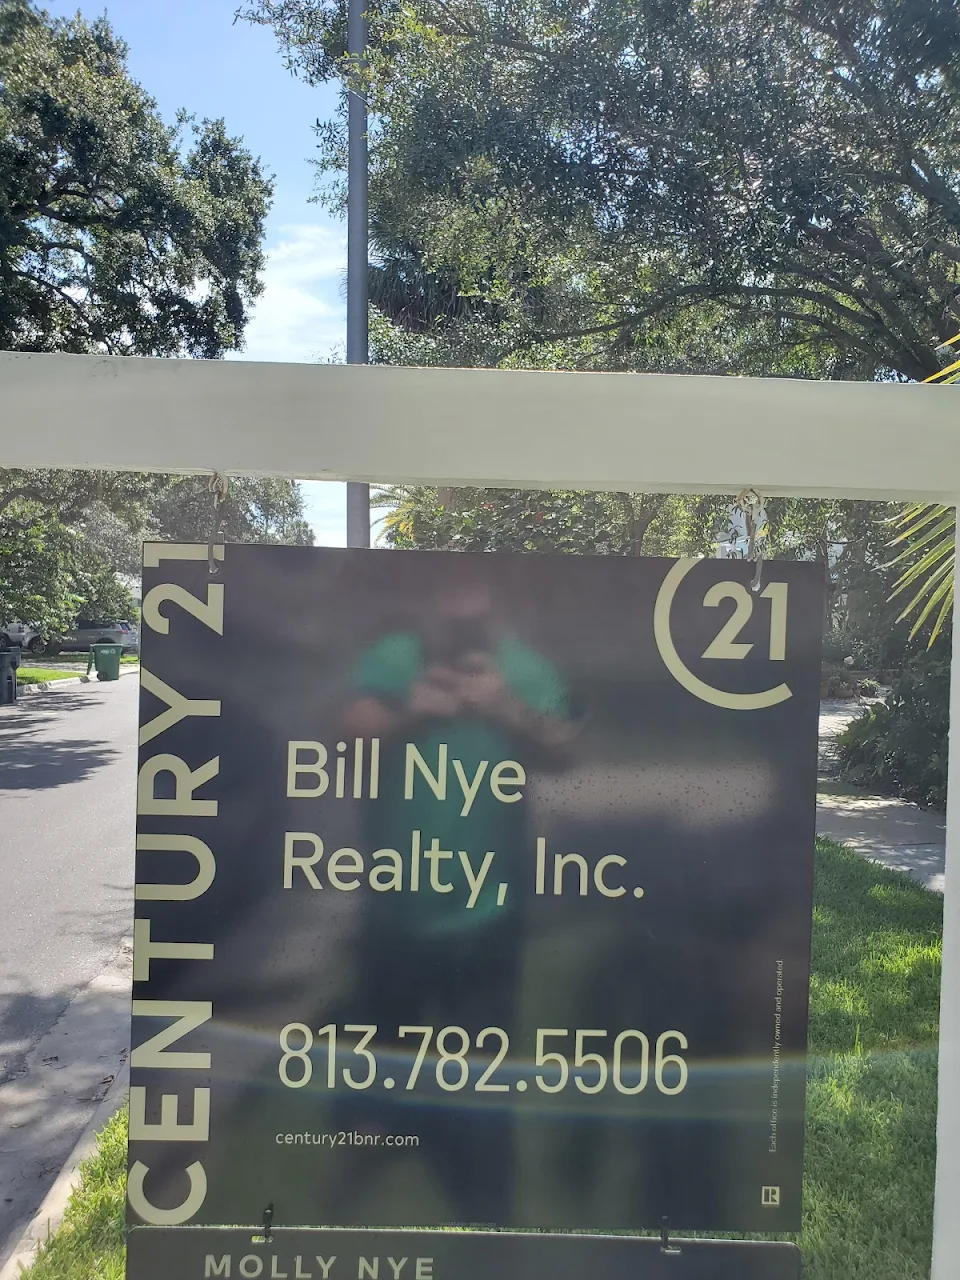 Bill Nye the science Guy branched out into real estate apparently